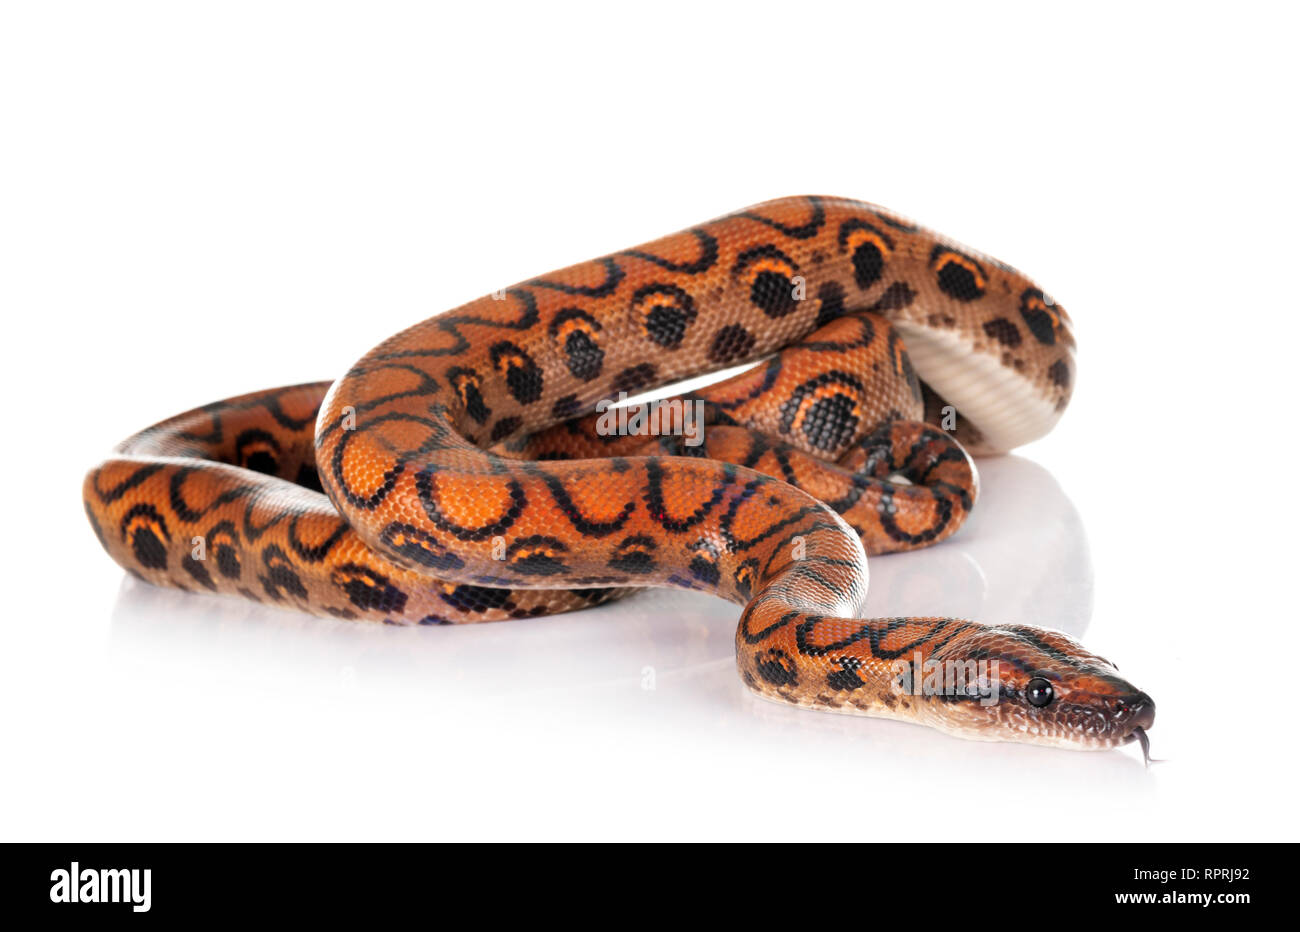 Rainbow boa in front of white background Stock Photo